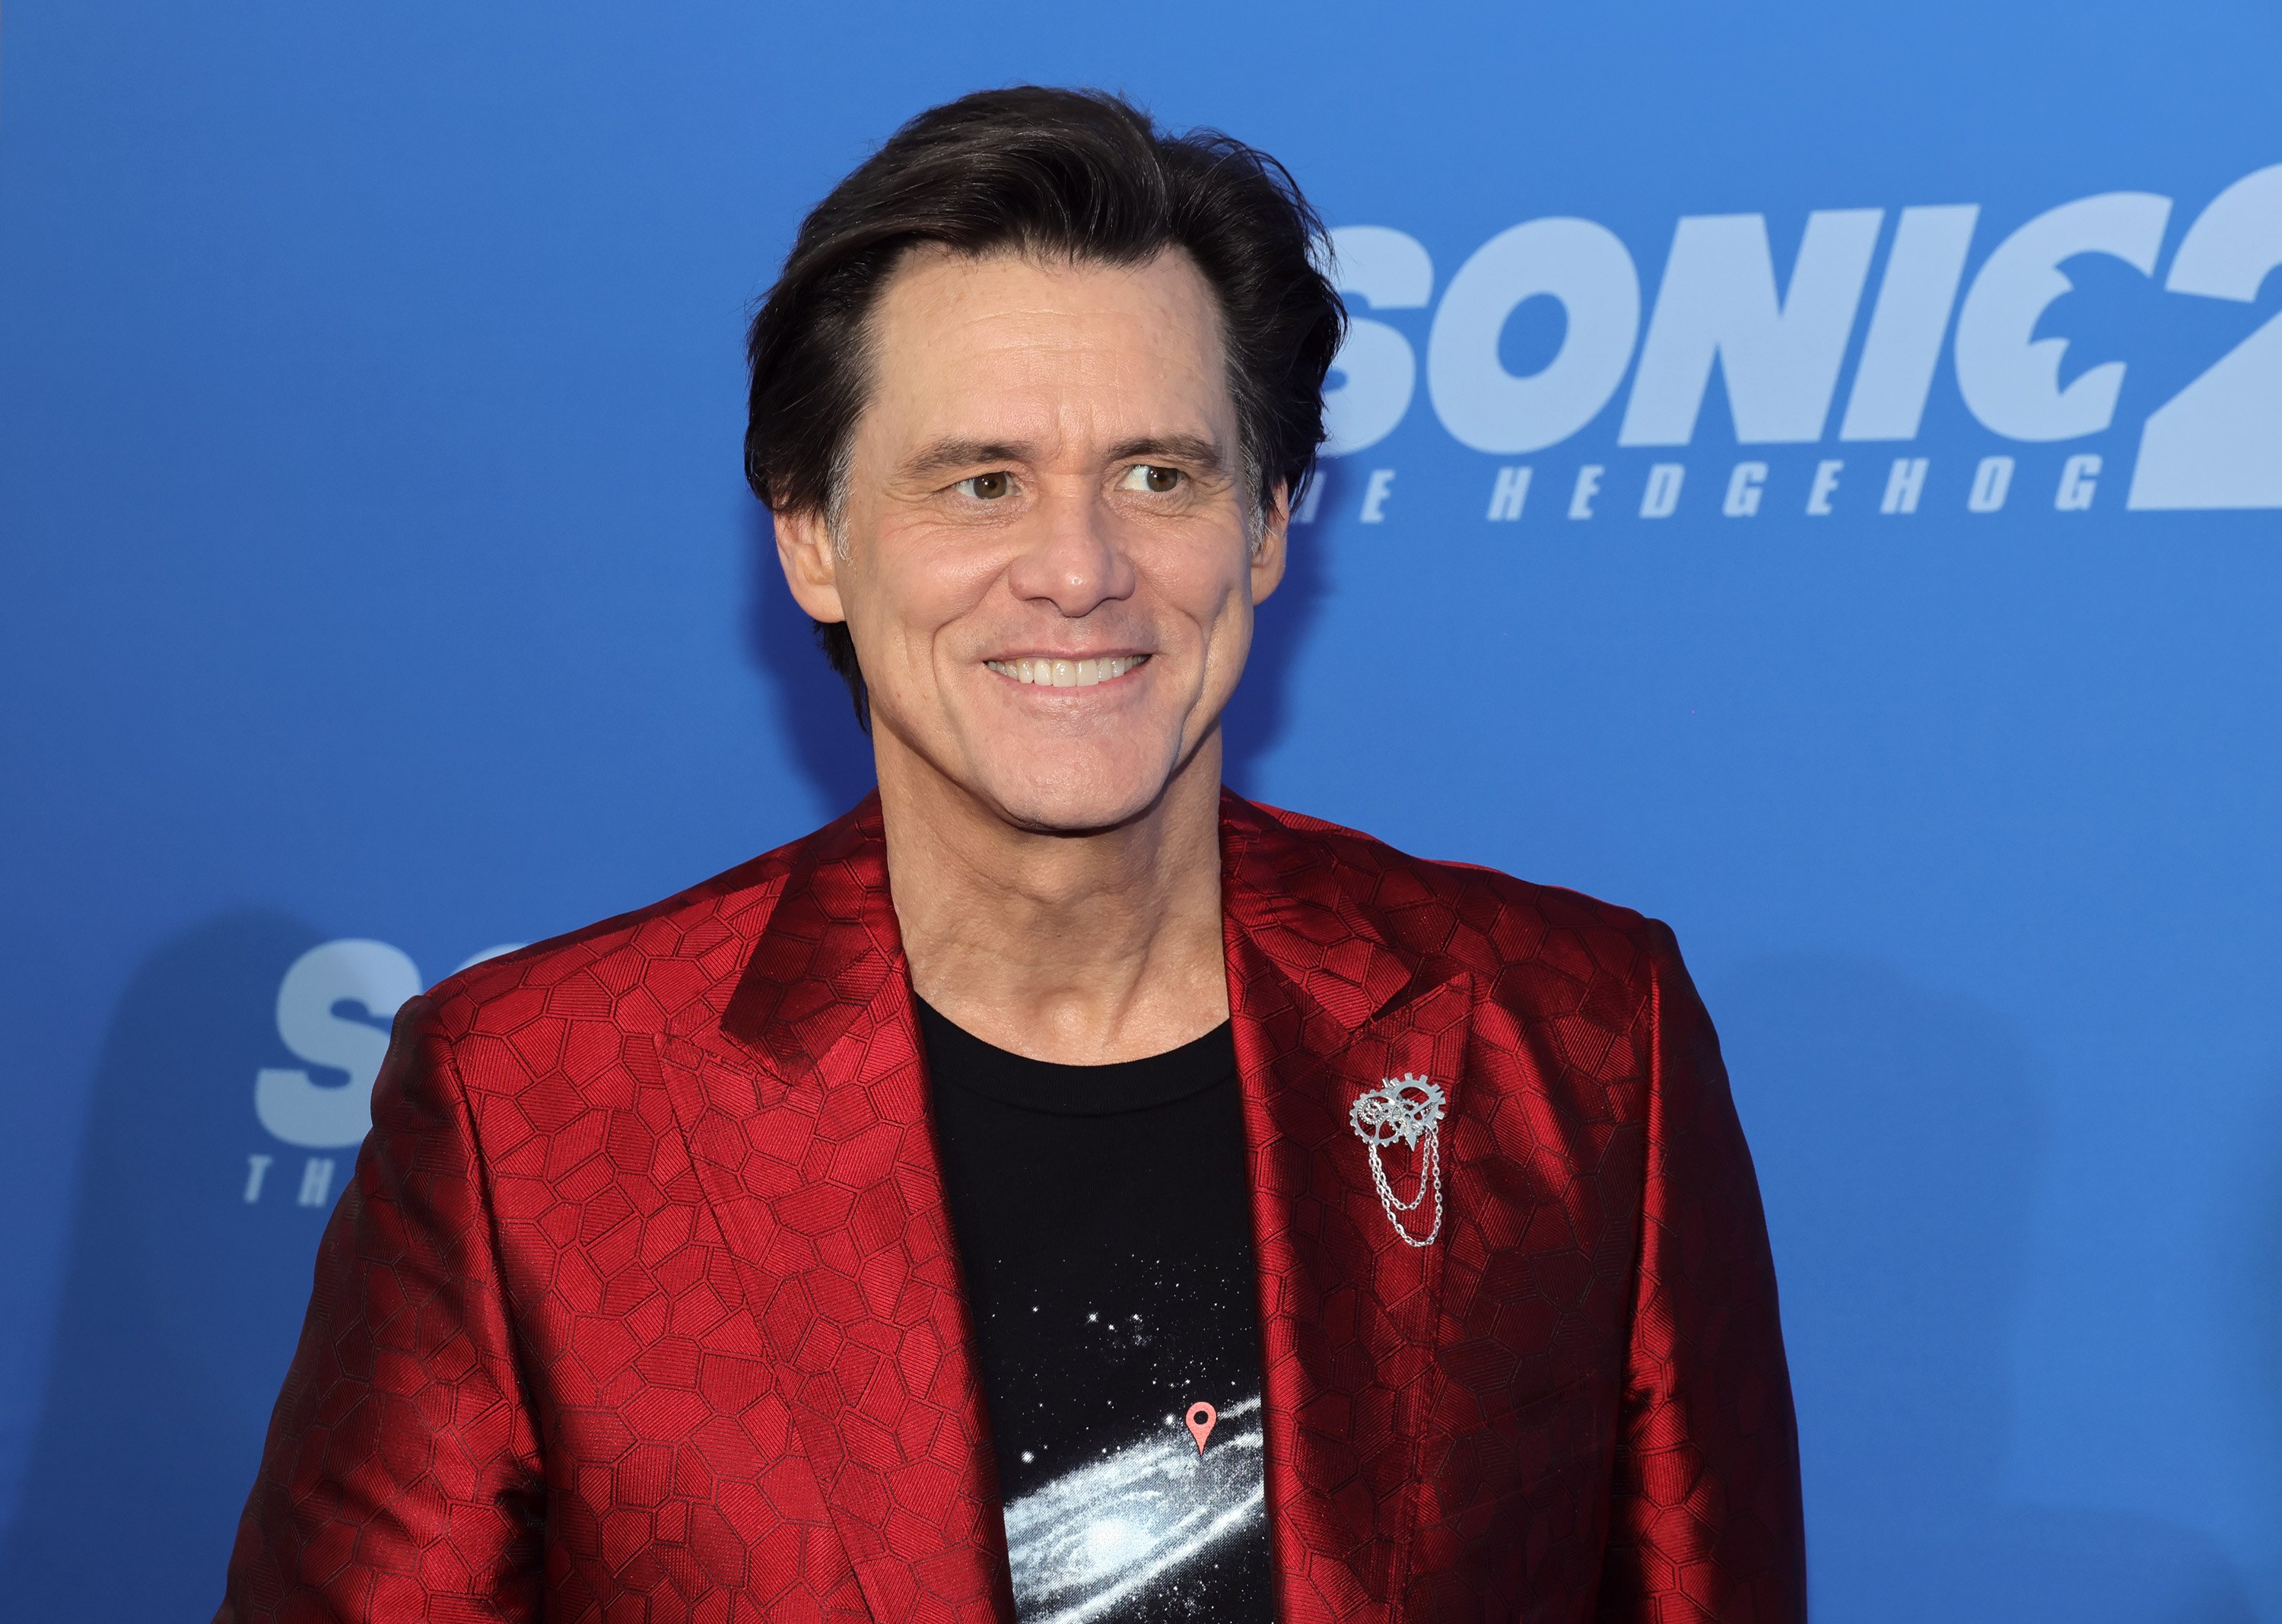 Jim Carrey Turns 61 He Will Enjoy More Time with His Grandson after